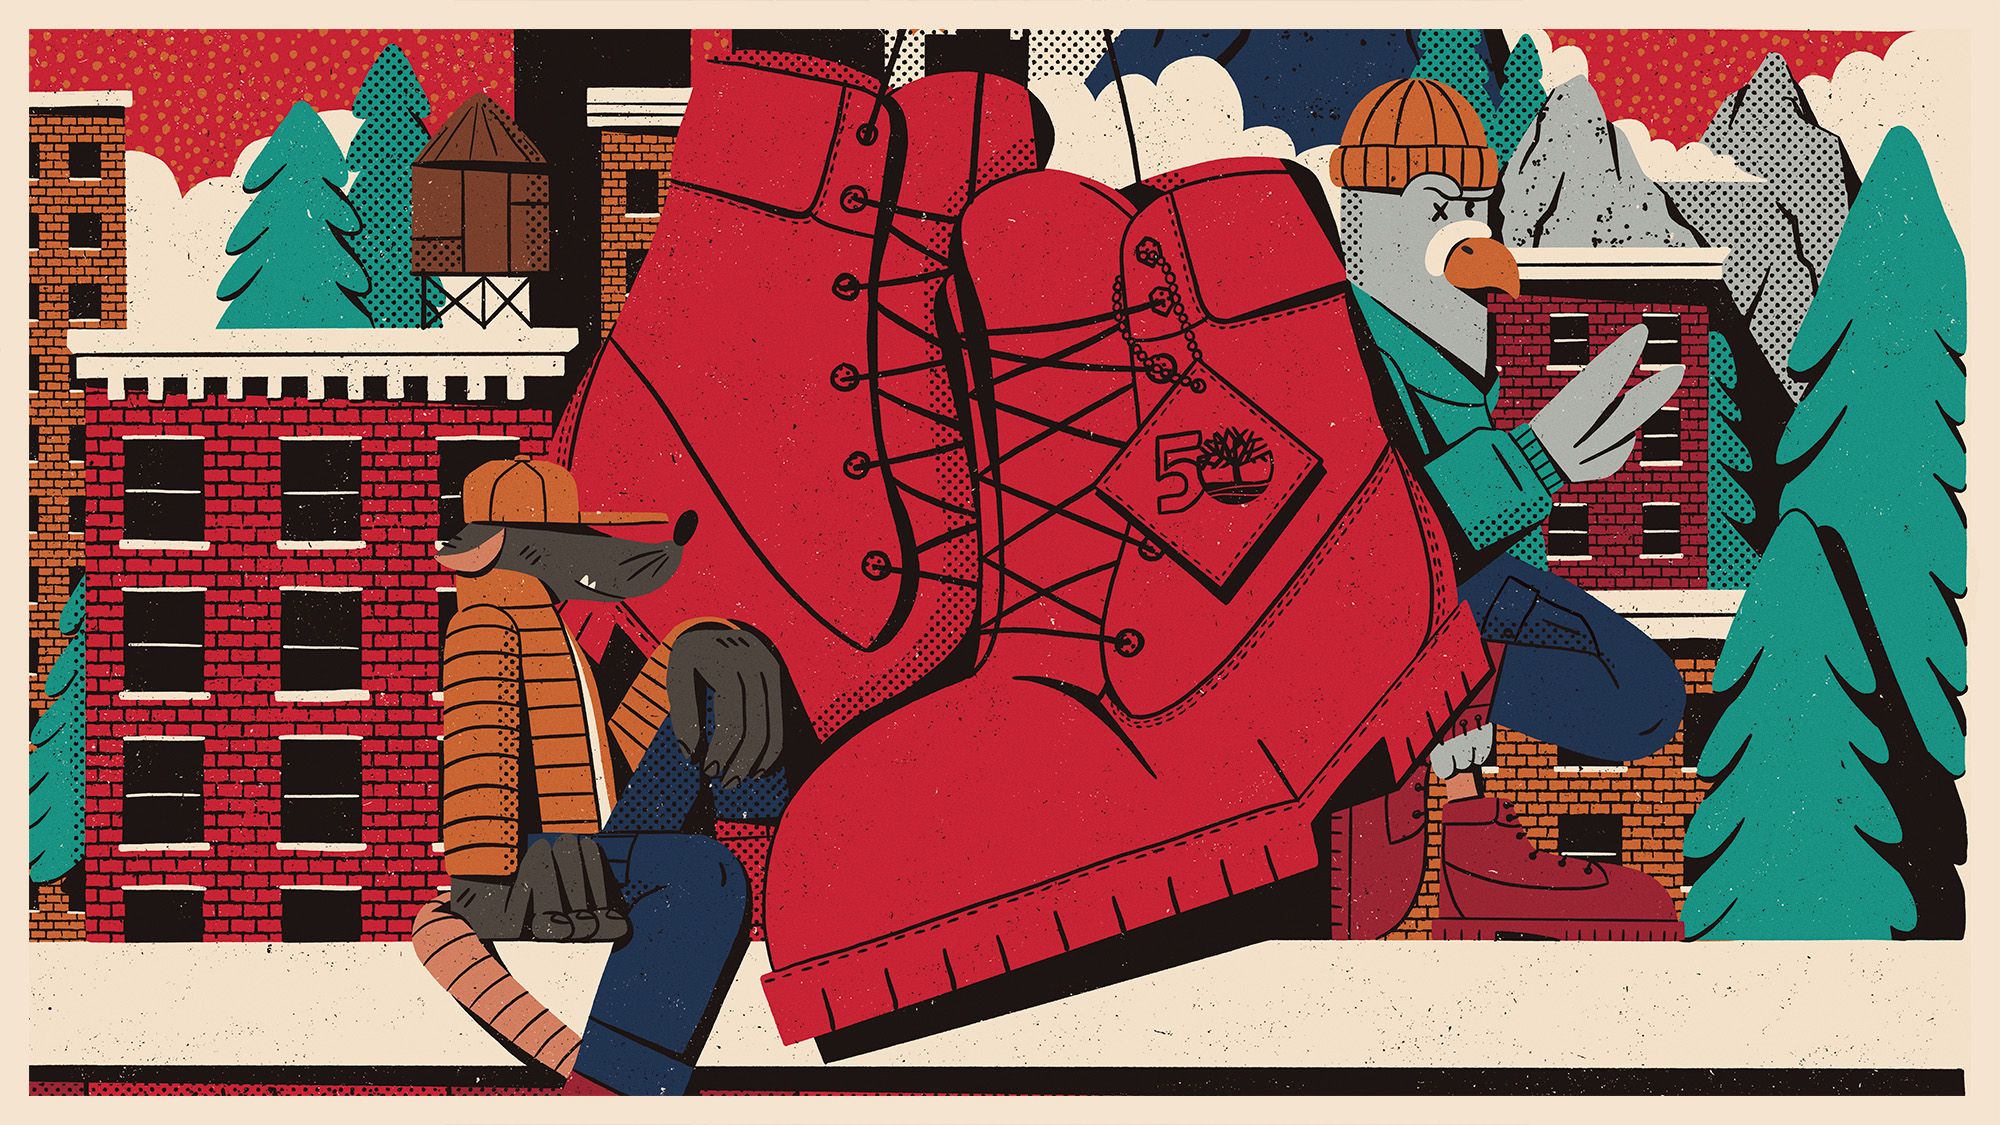 Illustration of Red Timberland boots over brick buildings, evergreen trees, and mountains